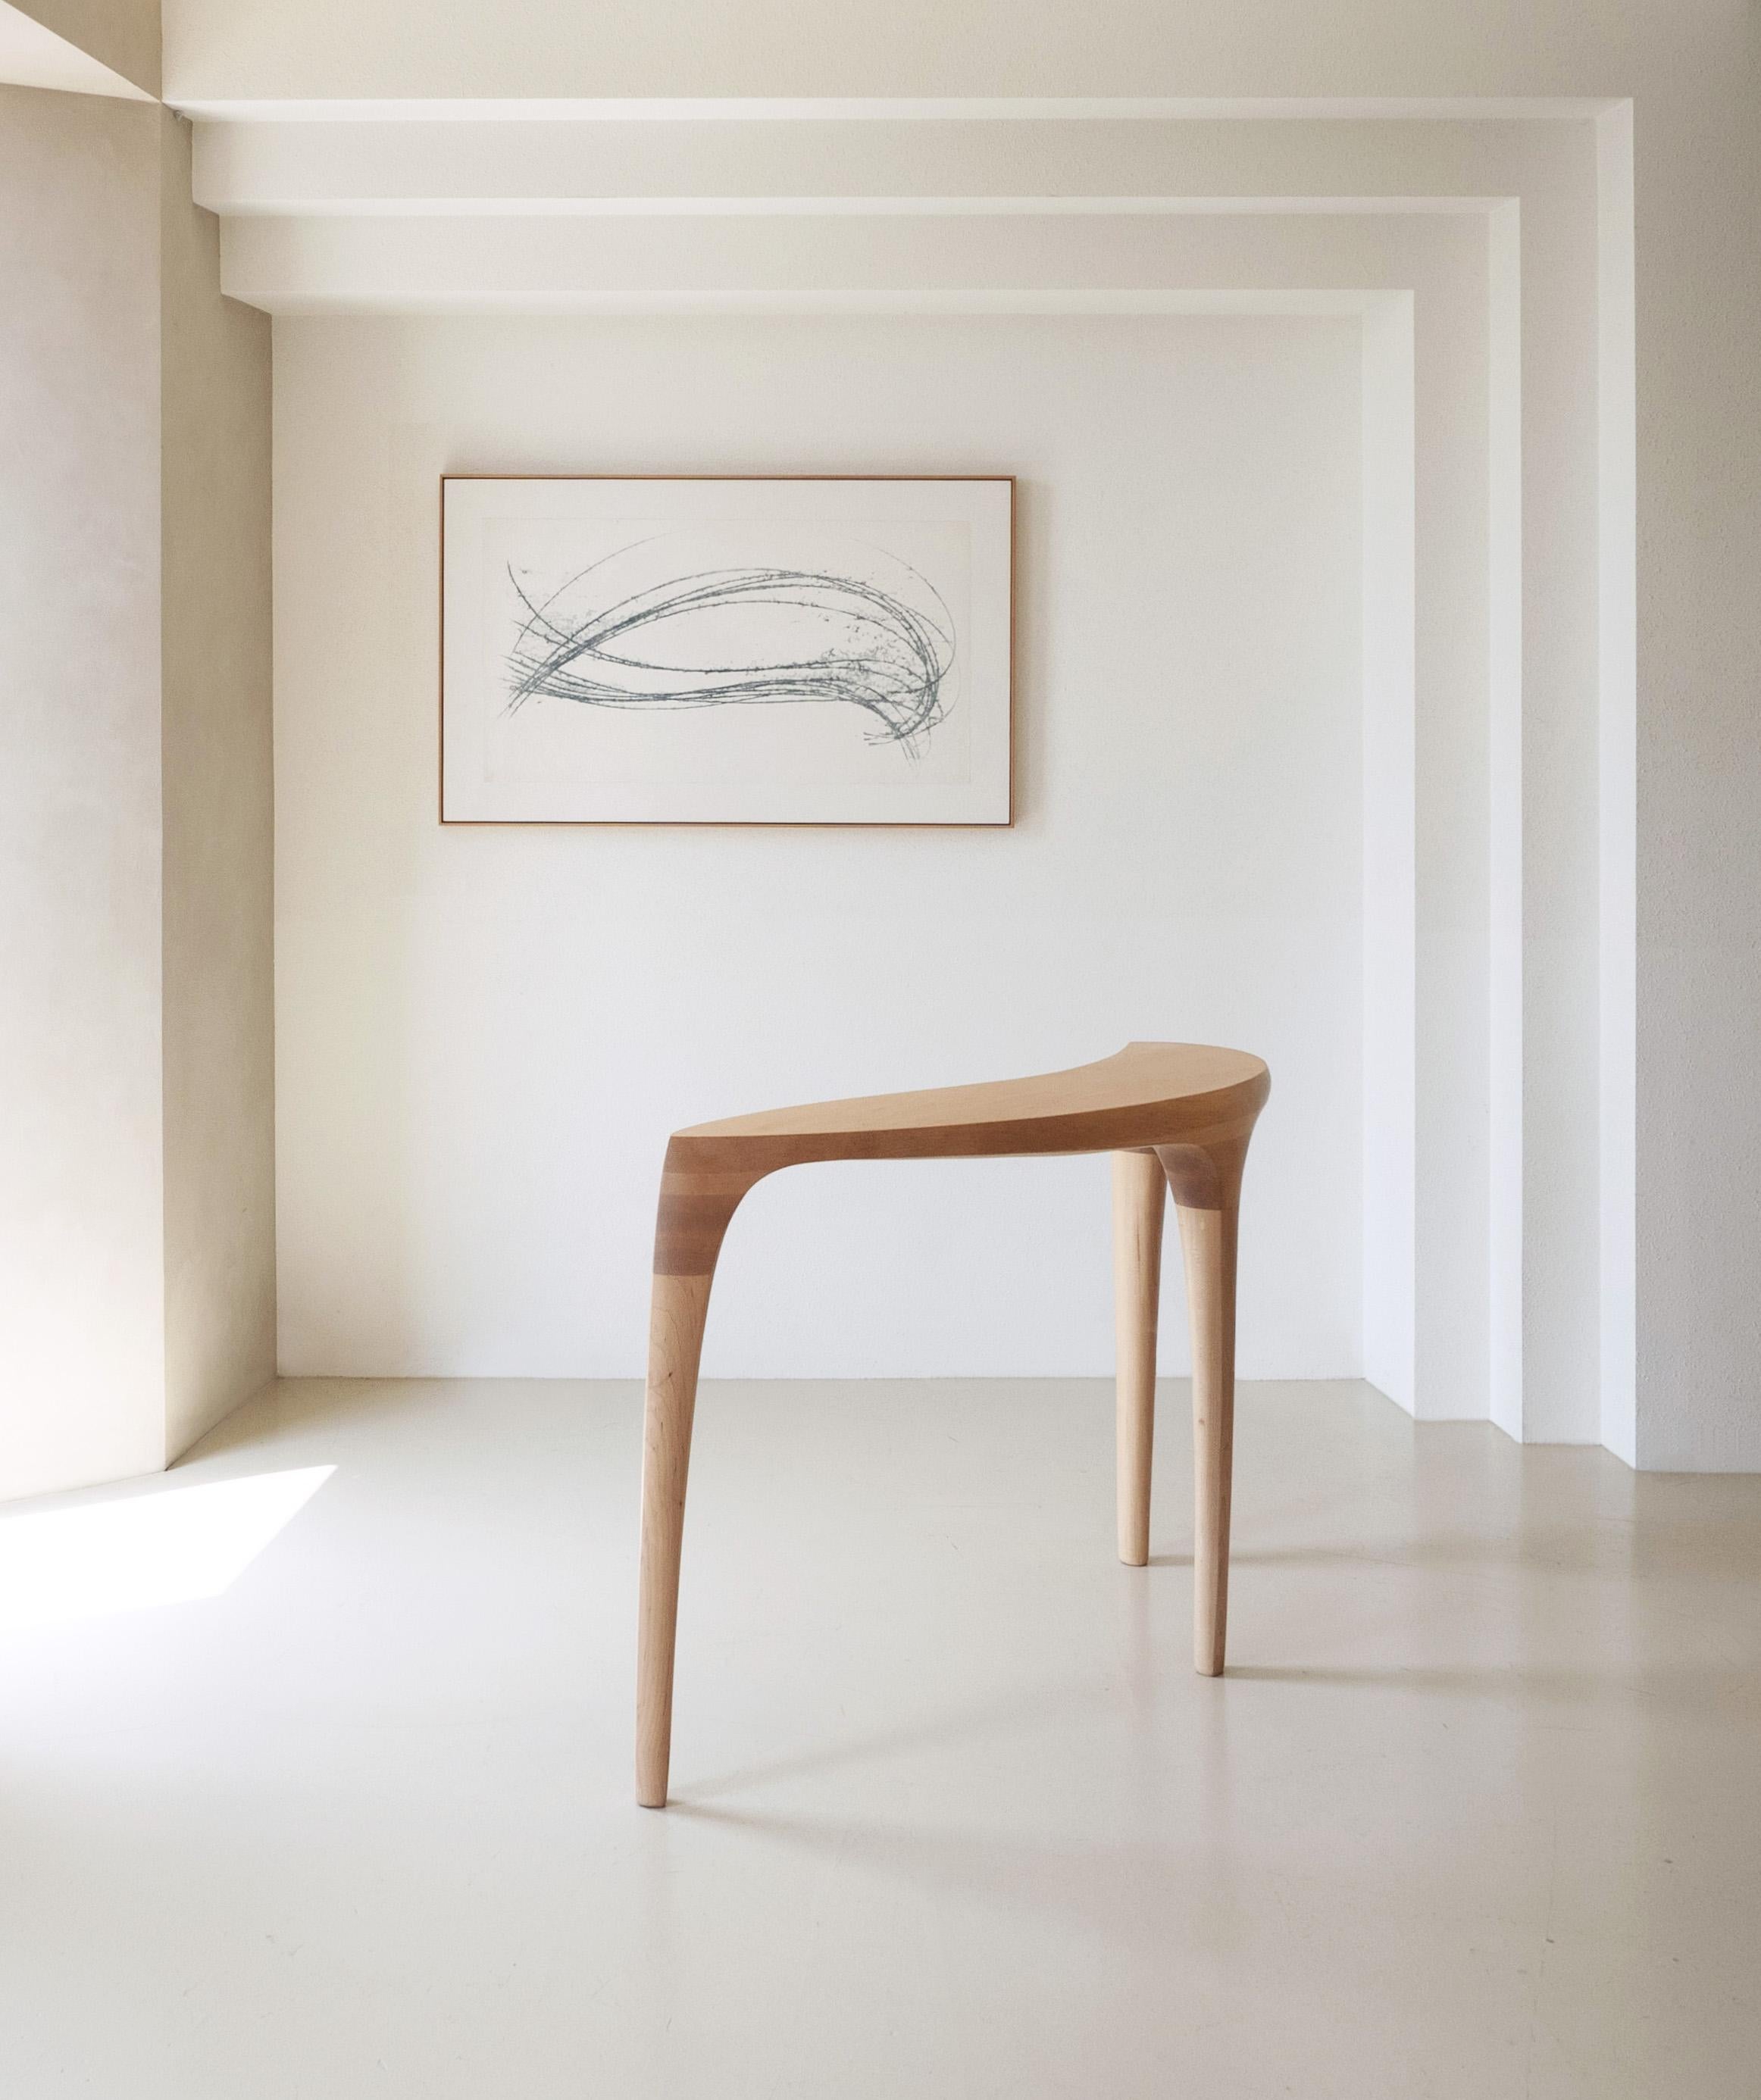 'Momentum Table' by Soo Joo is an Organic Modern sculptural console table in Hard Maple wood. The artist creatively reimagines the essence of traditional Korean aesthetic into a modern minimal context in this piece. 

It has a timeless, distilled